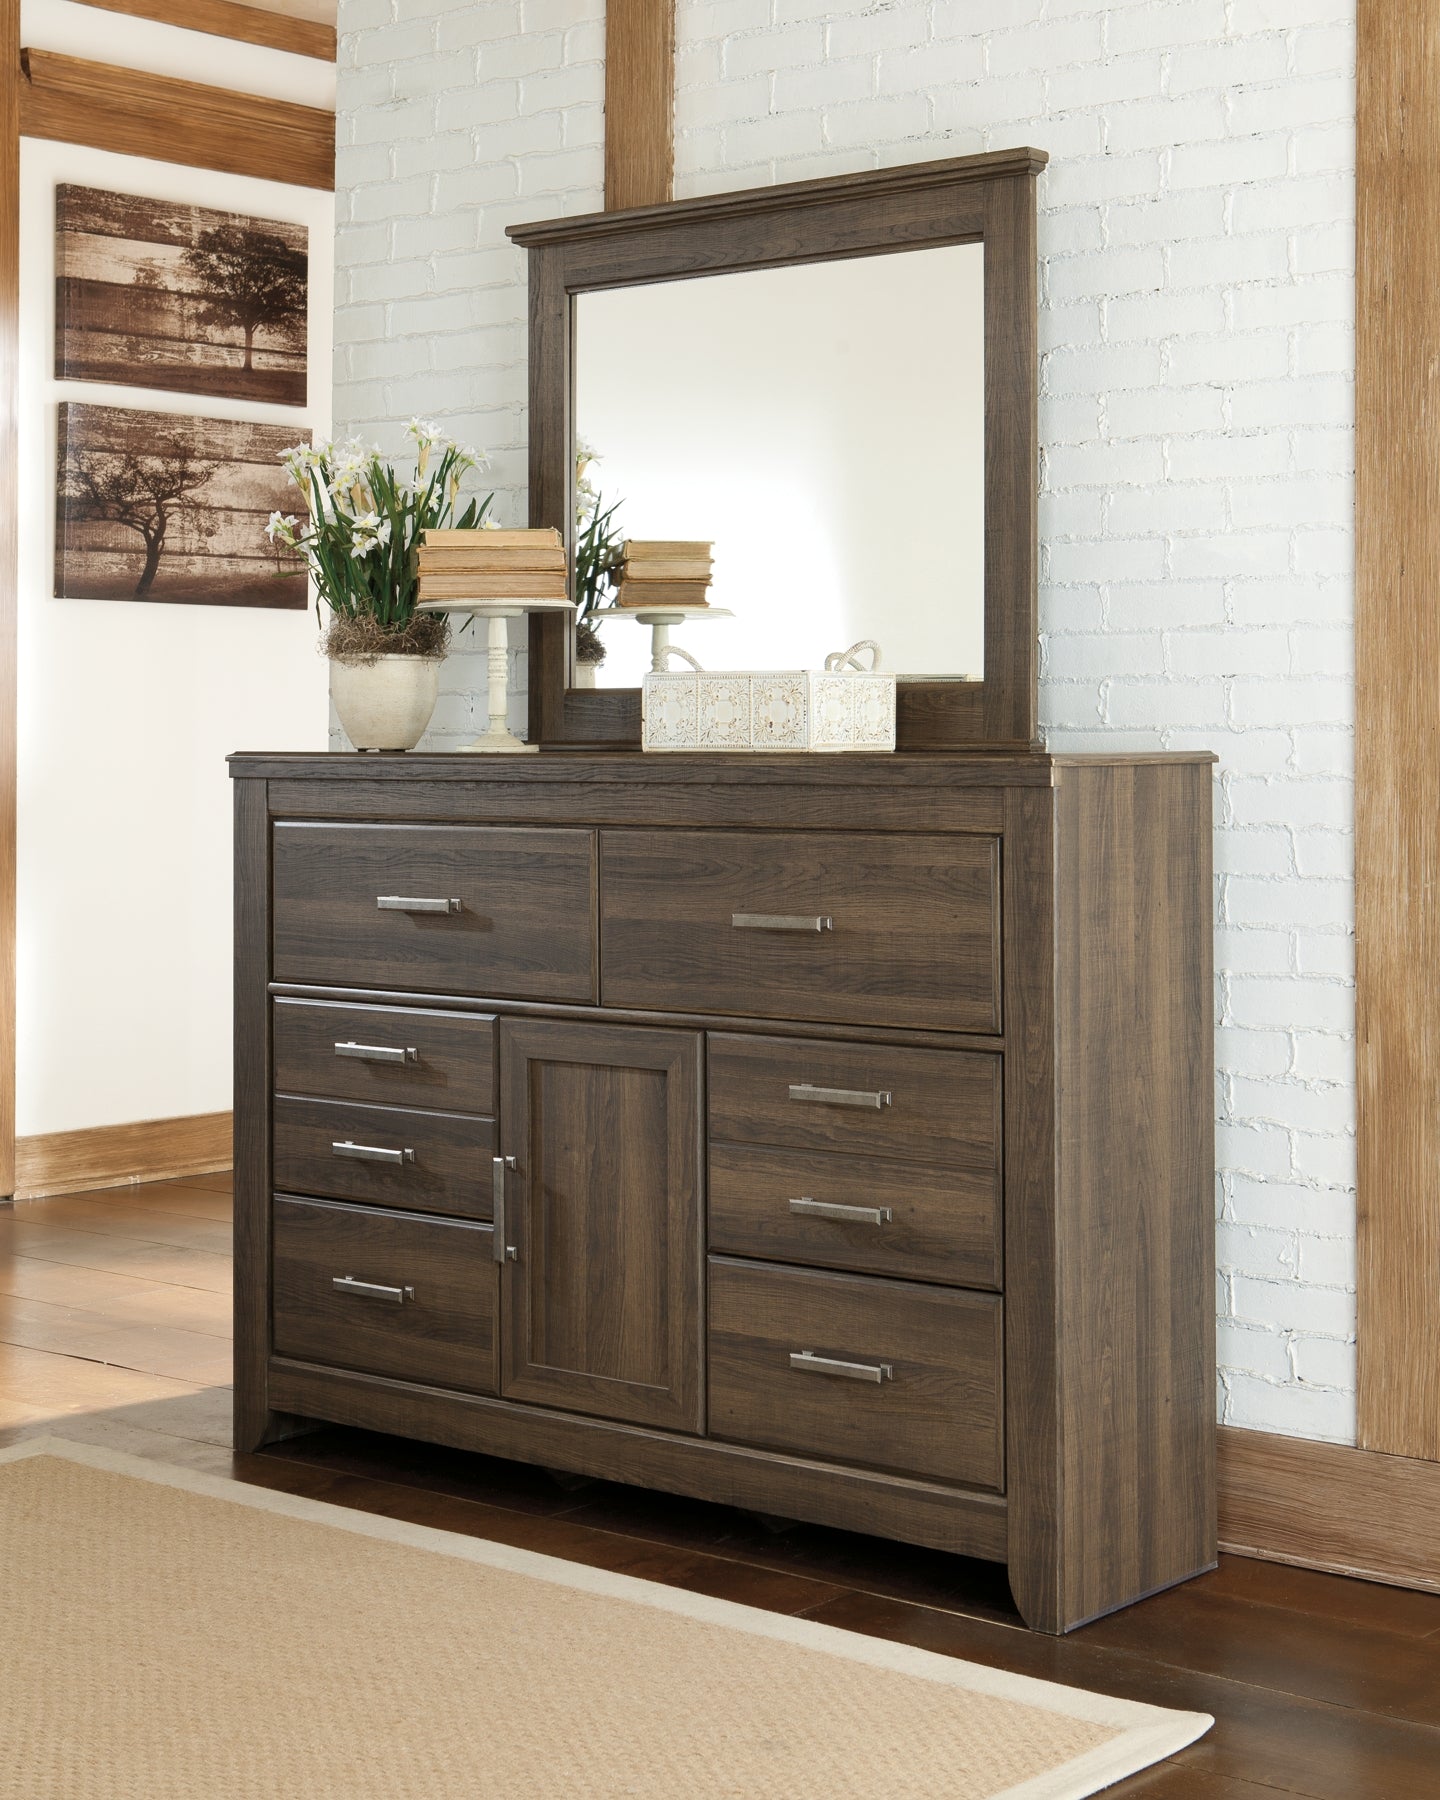 Juararo California King Panel Bed with Mirrored Dresser and 2 Nightstands at Walker Mattress and Furniture Locations in Cedar Park and Belton TX.